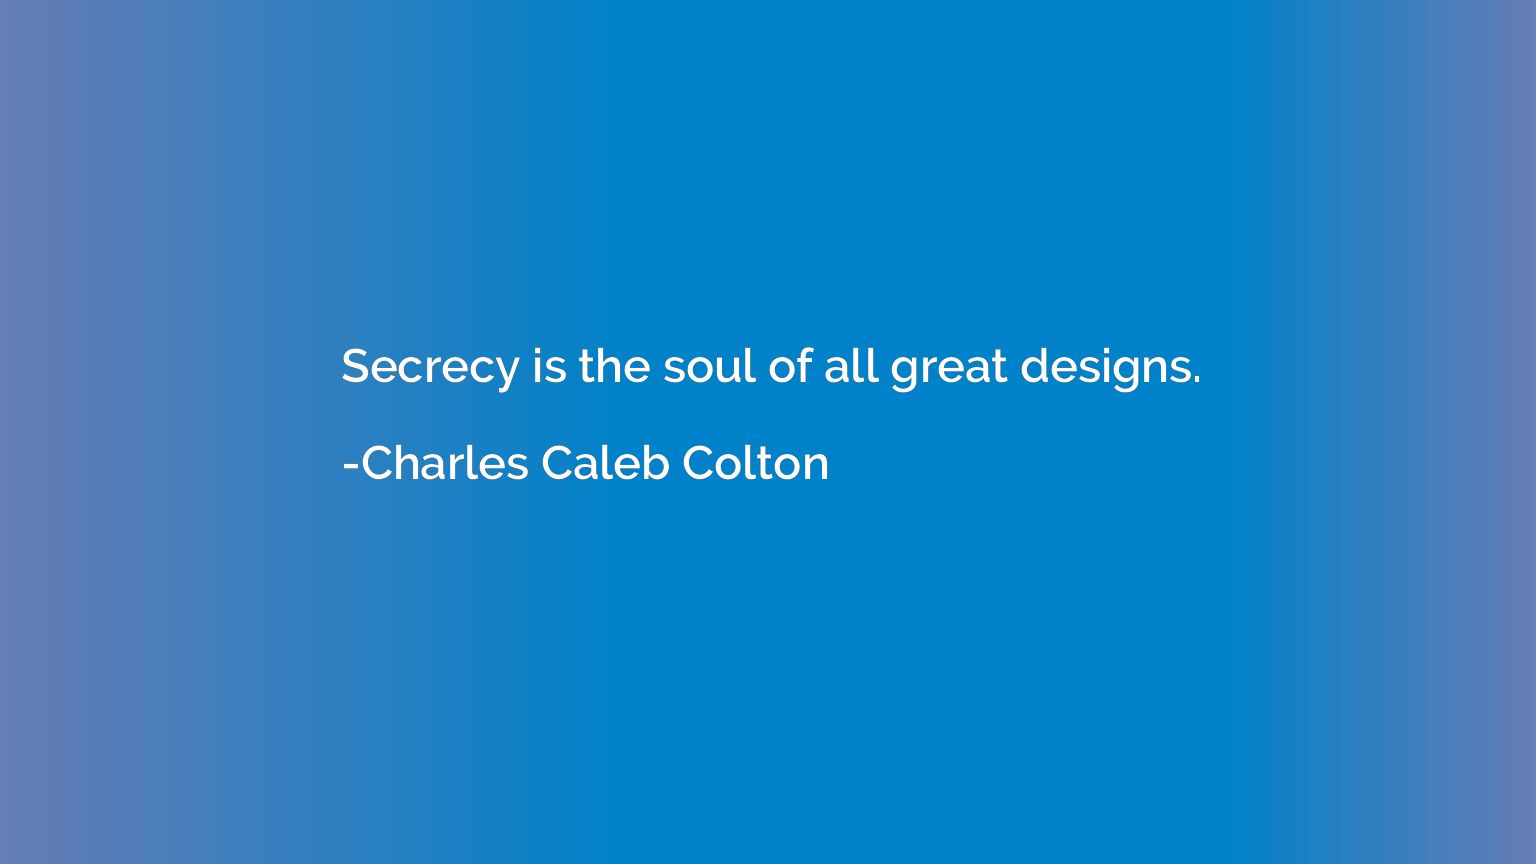 Secrecy is the soul of all great designs.